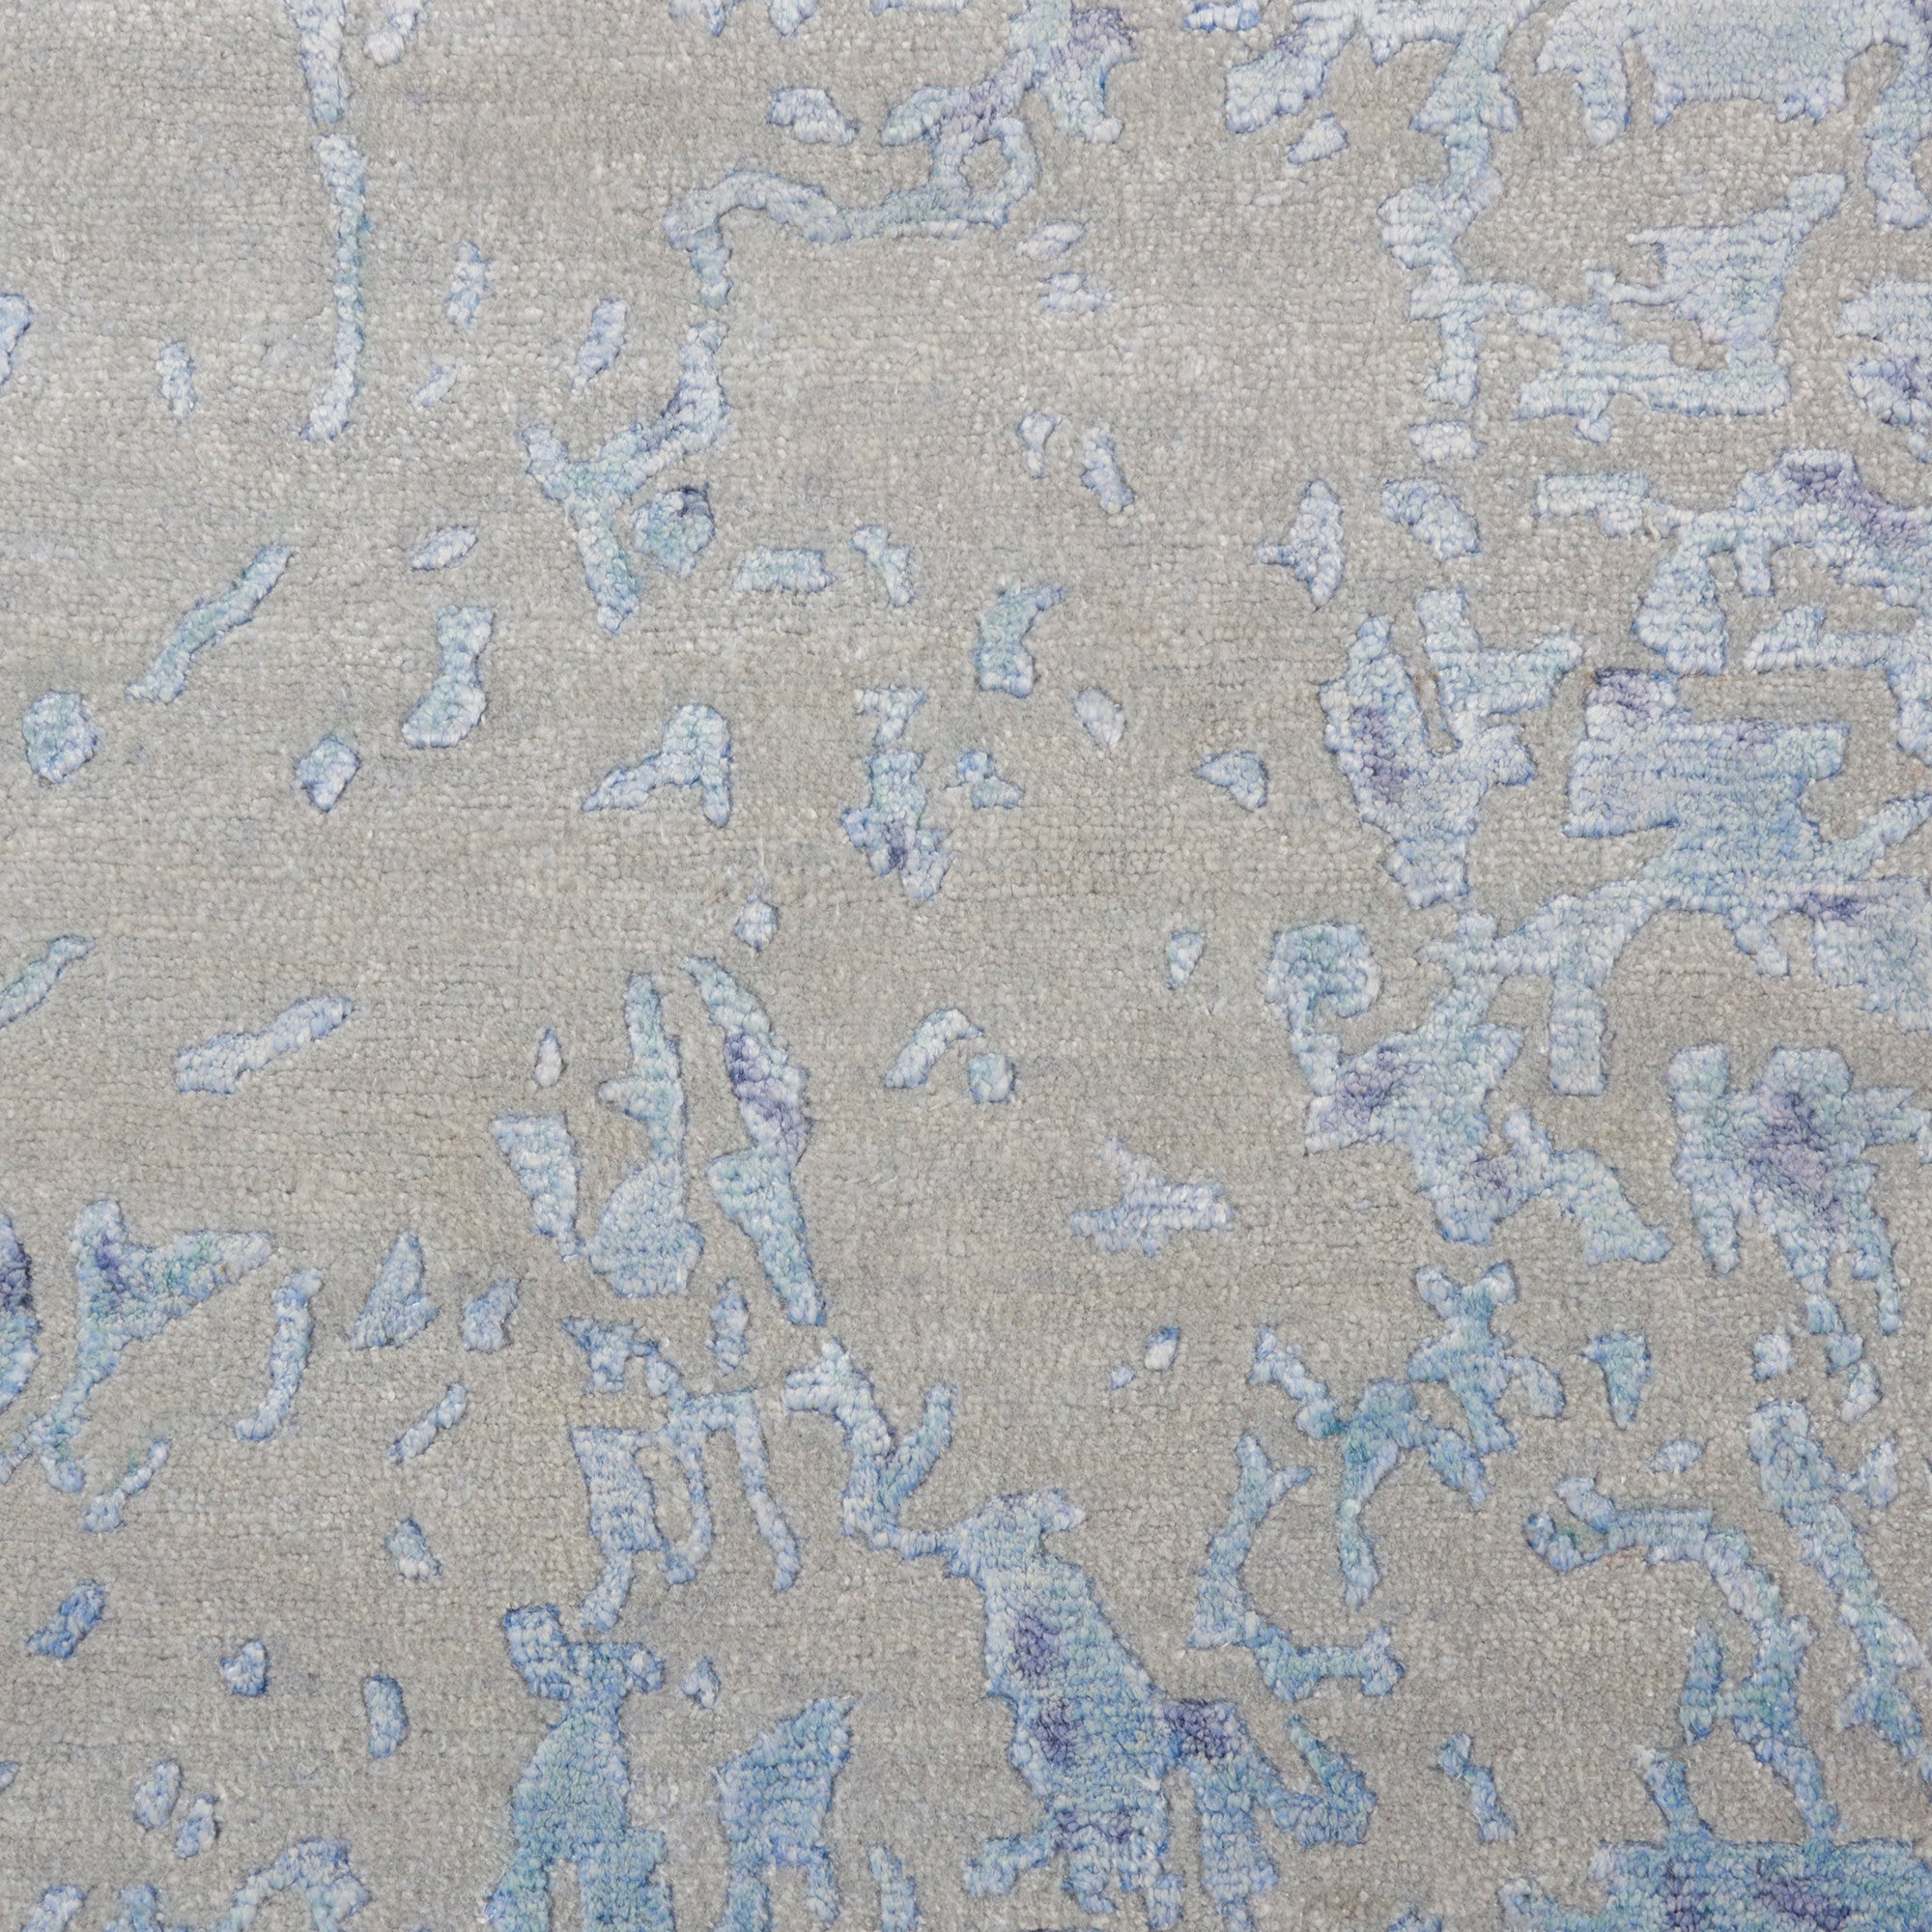 Close-up of textured fabric with abstract blue pattern on neutral base.